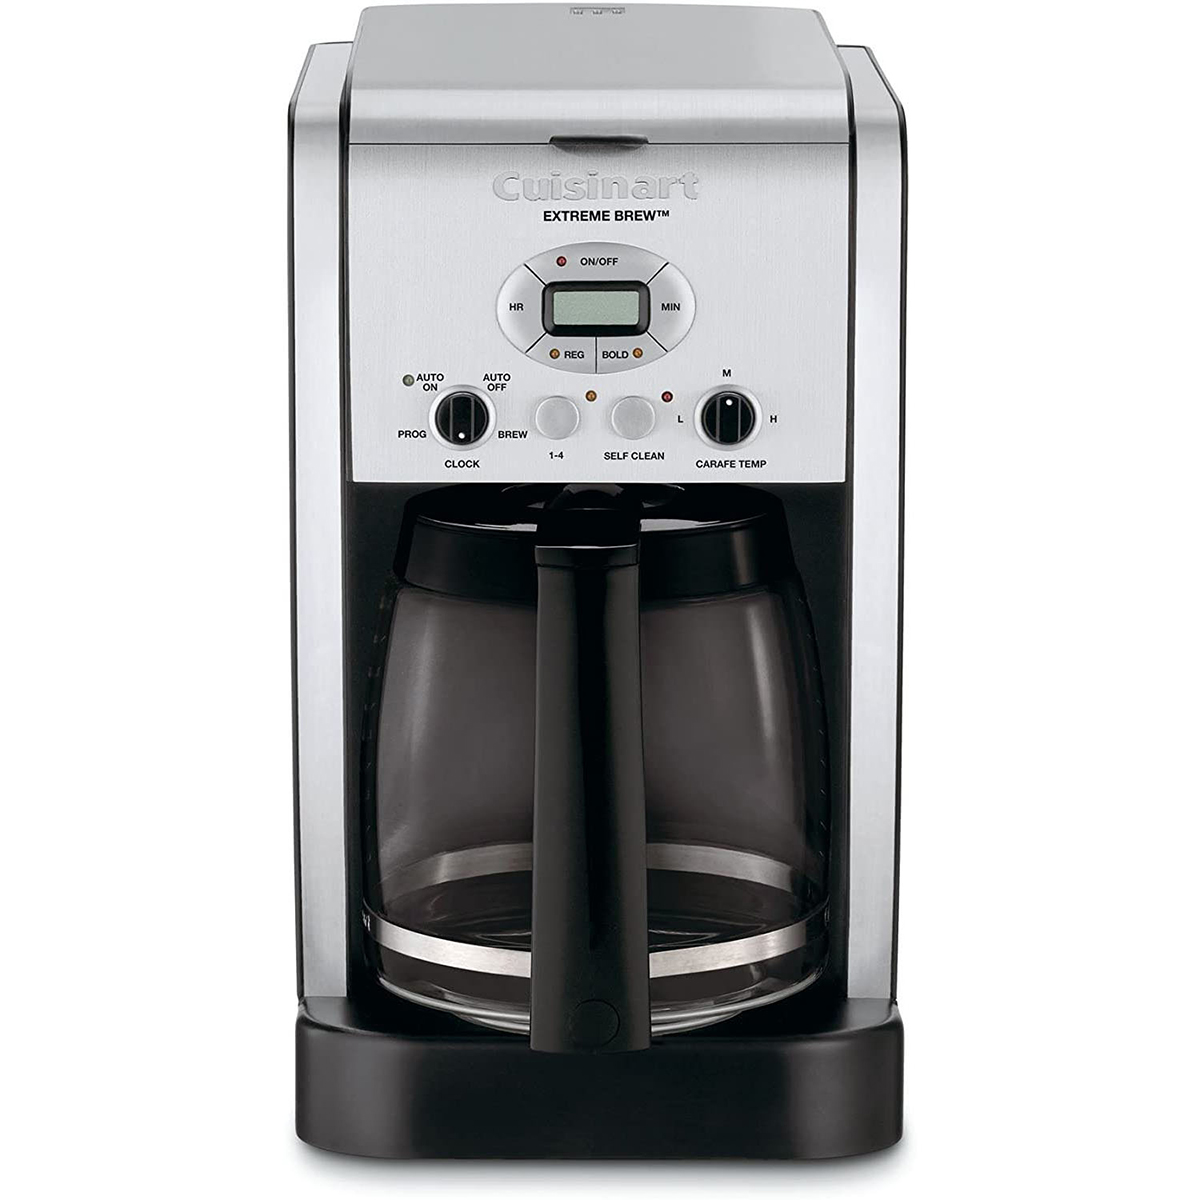 Cuisinart(R) Extreme Brew(R) 12 Cup Programmable Coffee Maker